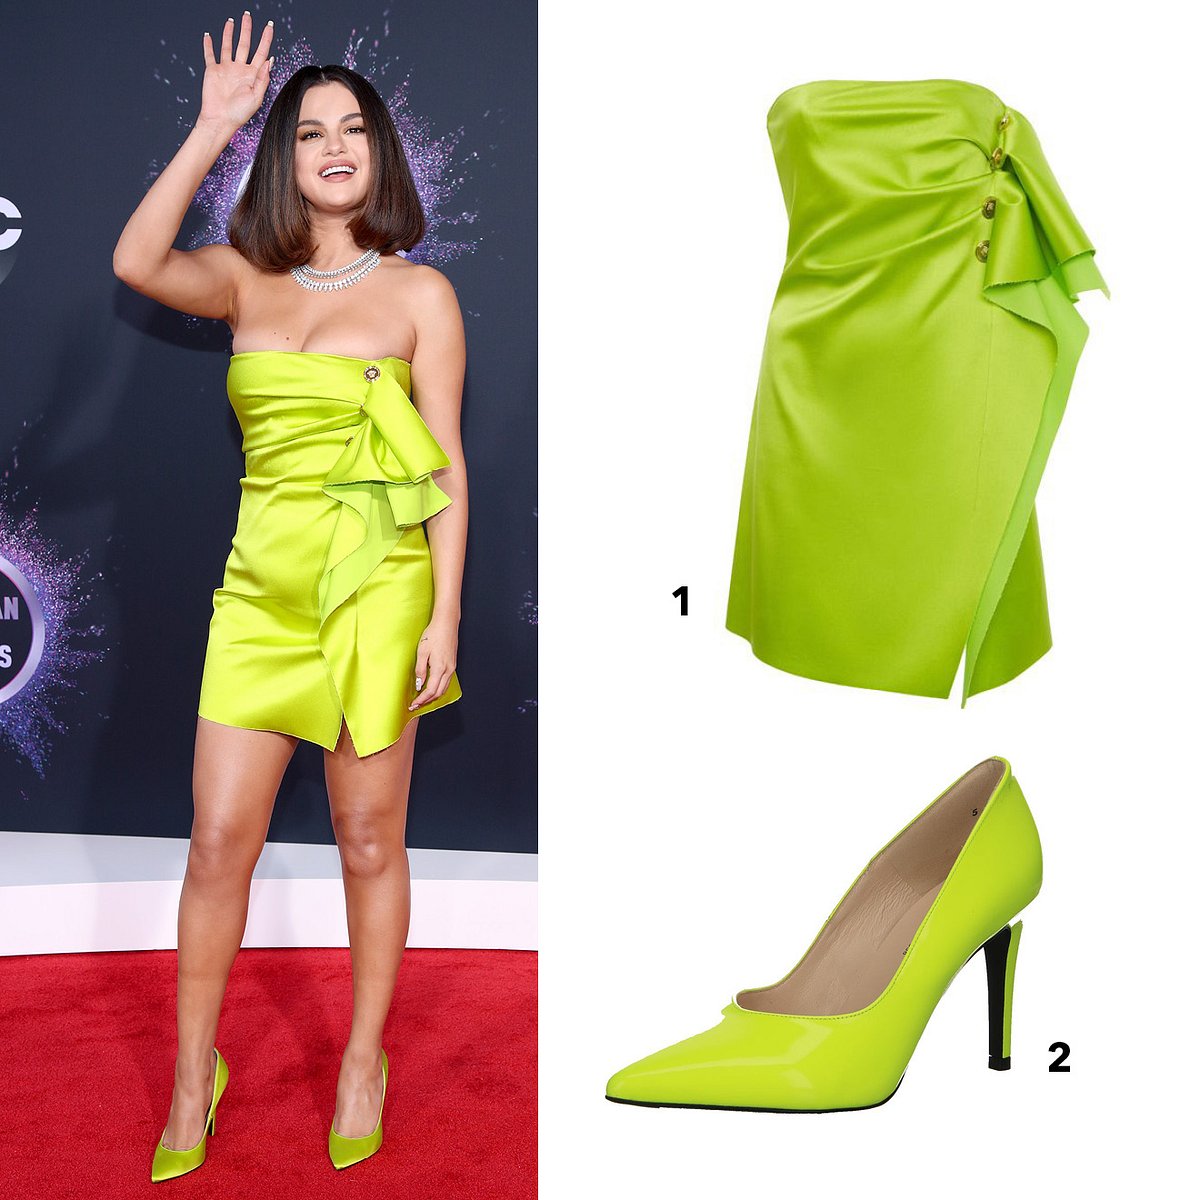 Steal Style, Star Style, Star Outfits, Outfit Selena Gomez, Klamotten Stars, Klamotten Selena Gomez, look like Selena Gomez, wie Selena Gomez aussehen